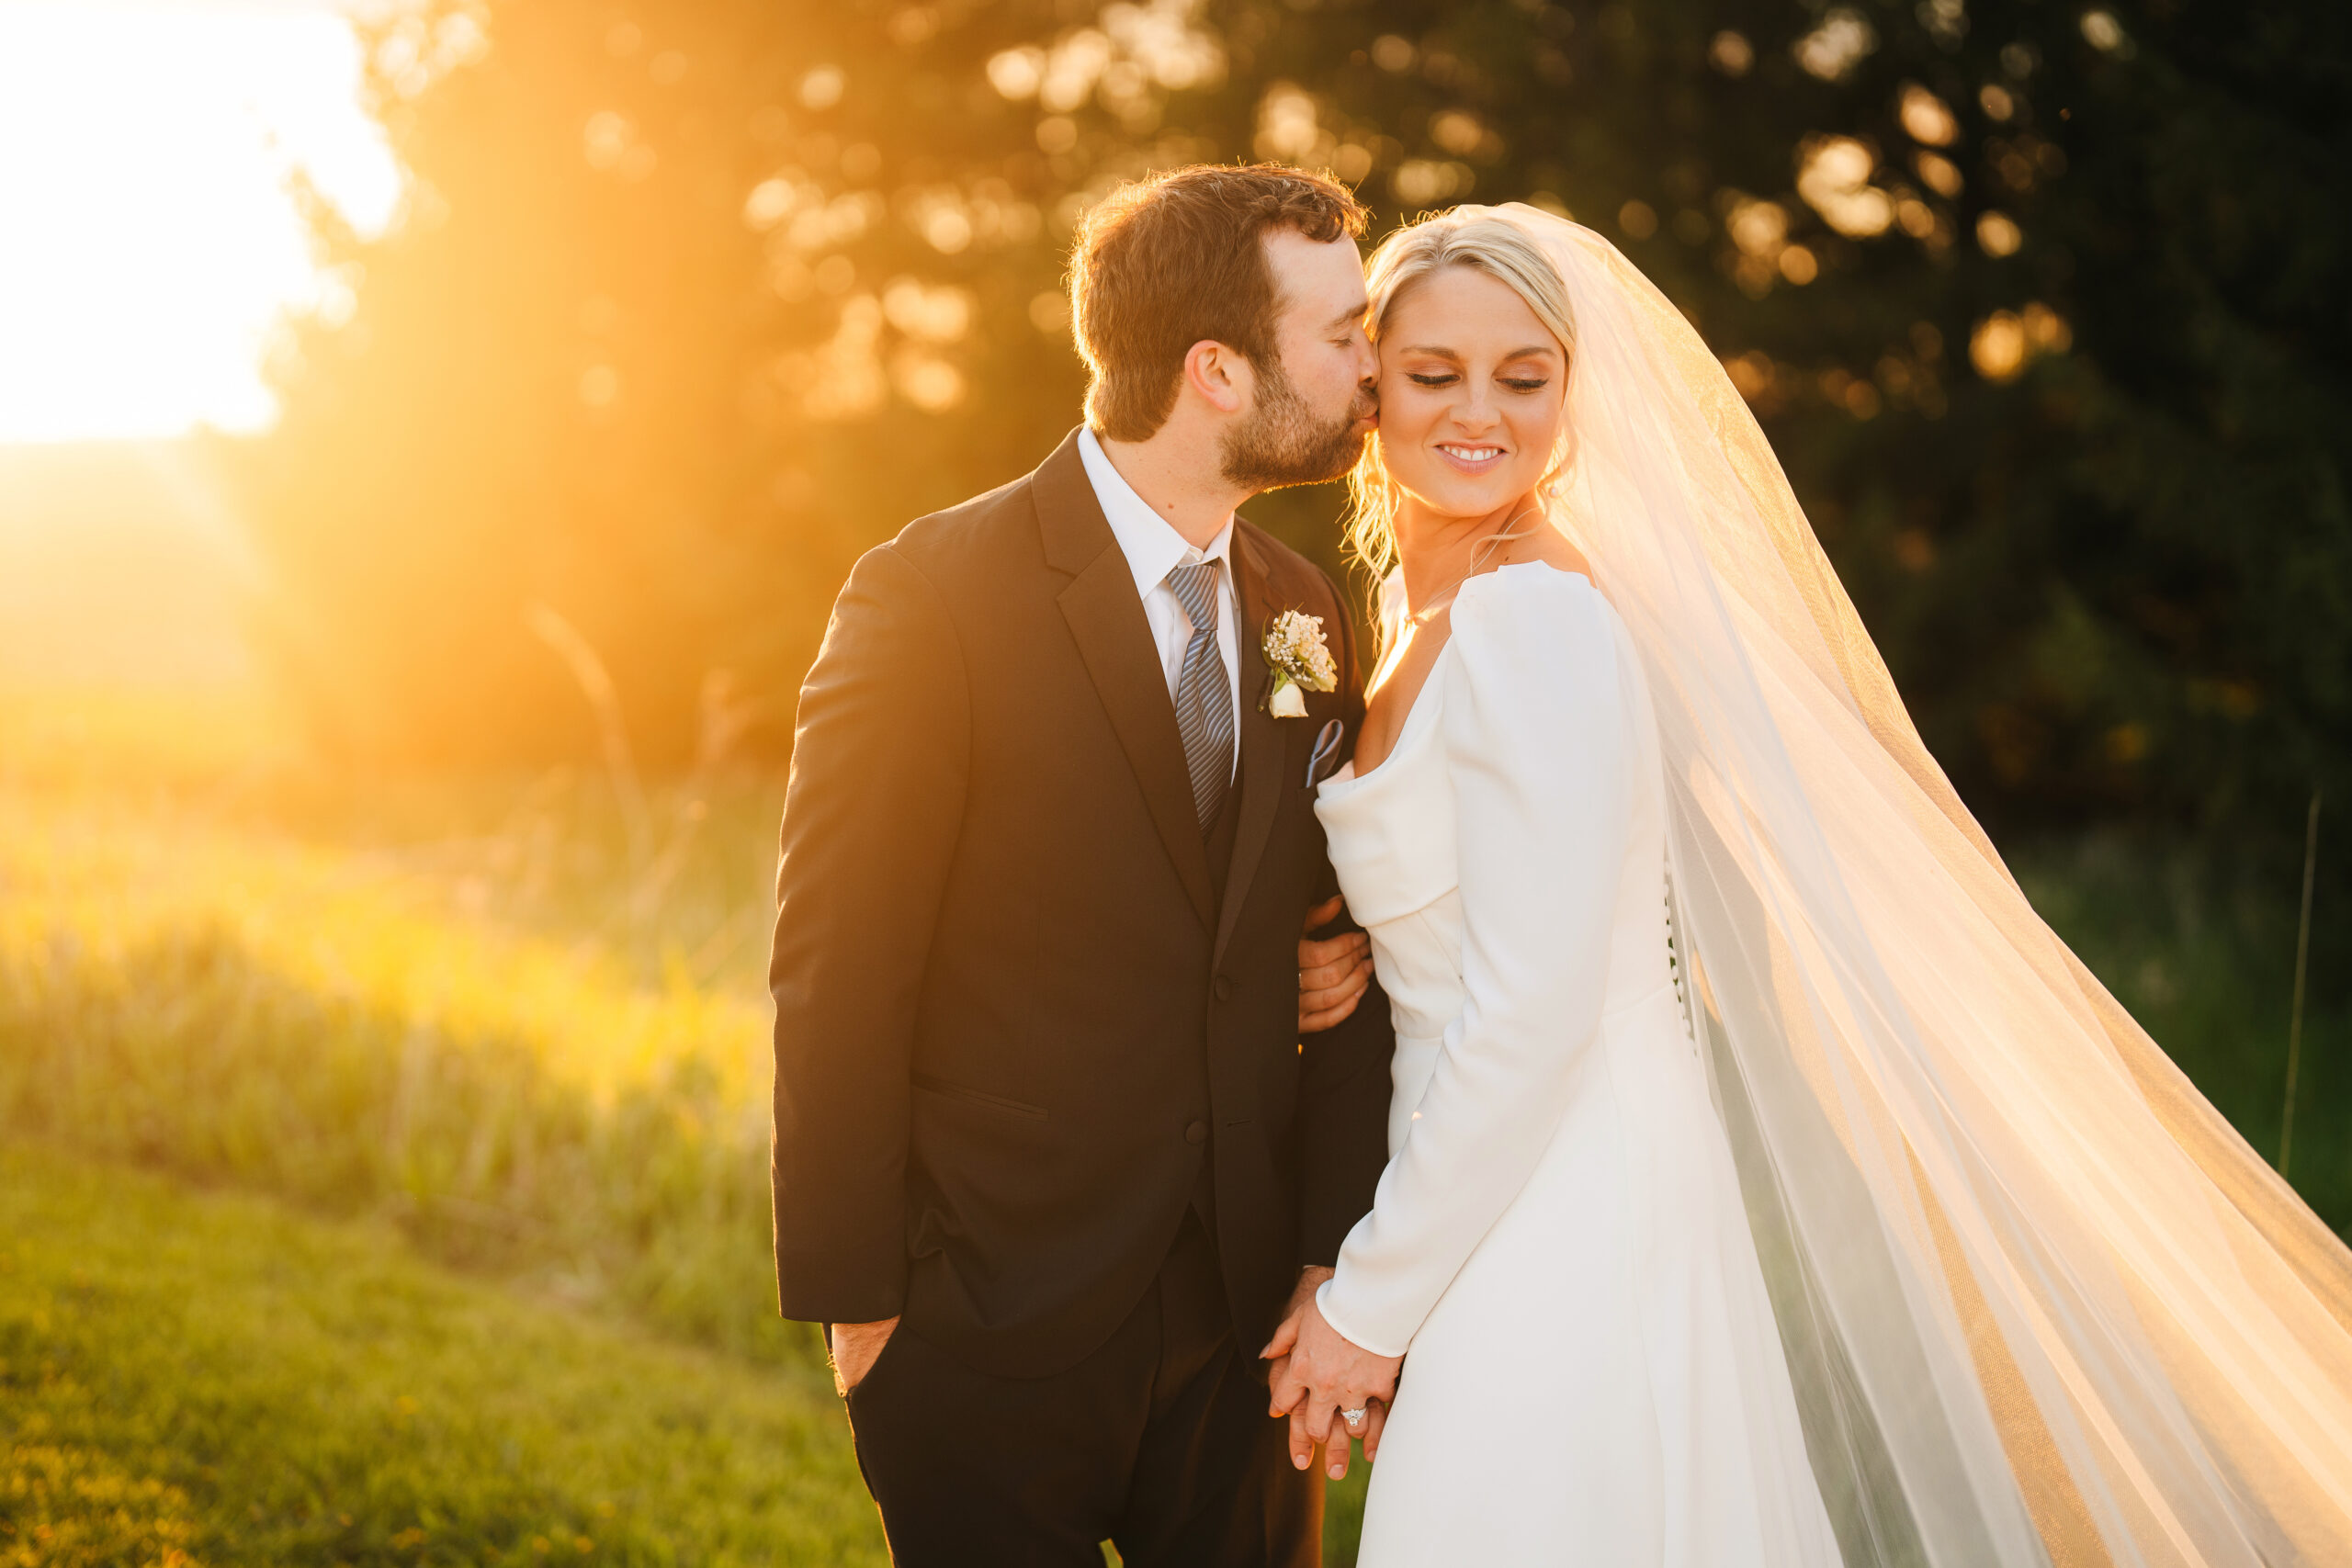 A groom kisses his bride tenderly as the golden sun bathes them in a warm, radiant glow.